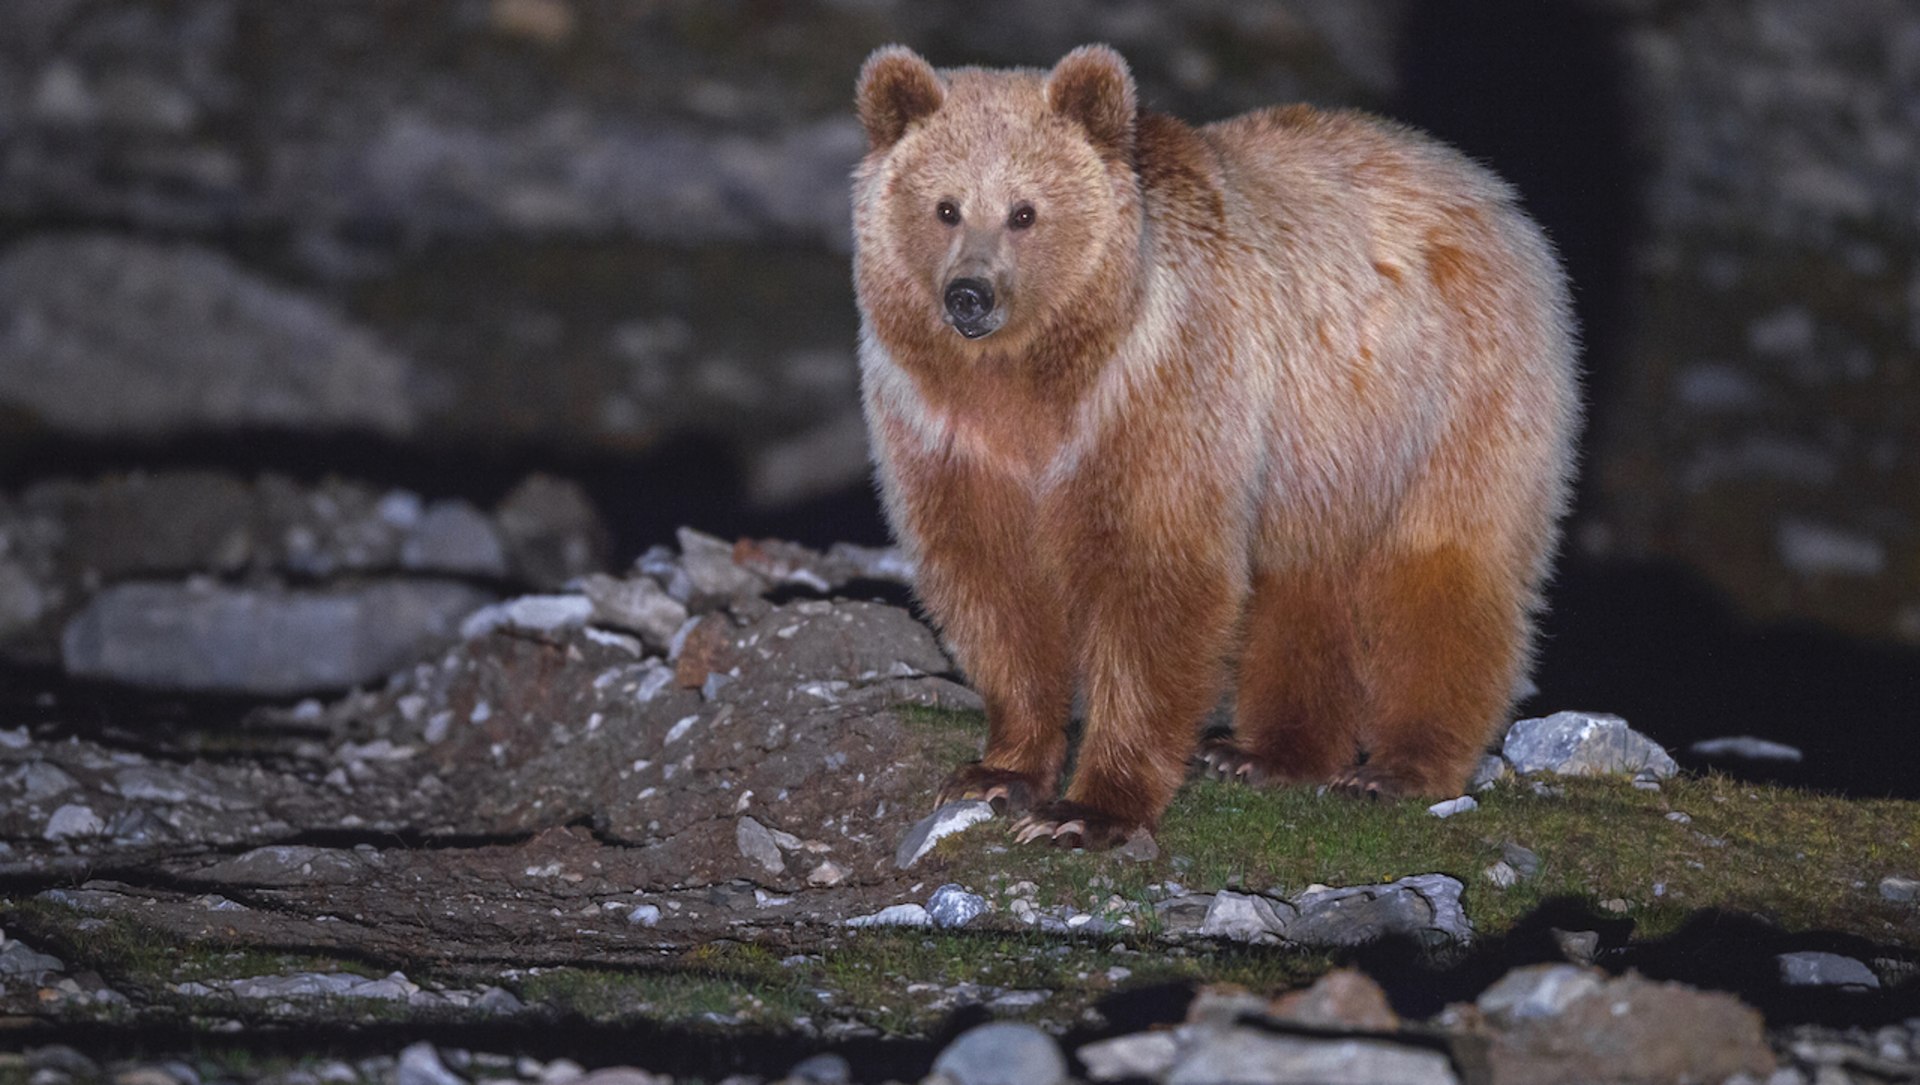 Behind the Lens: An Elusive Bear and Lessons in Wildlife Photography